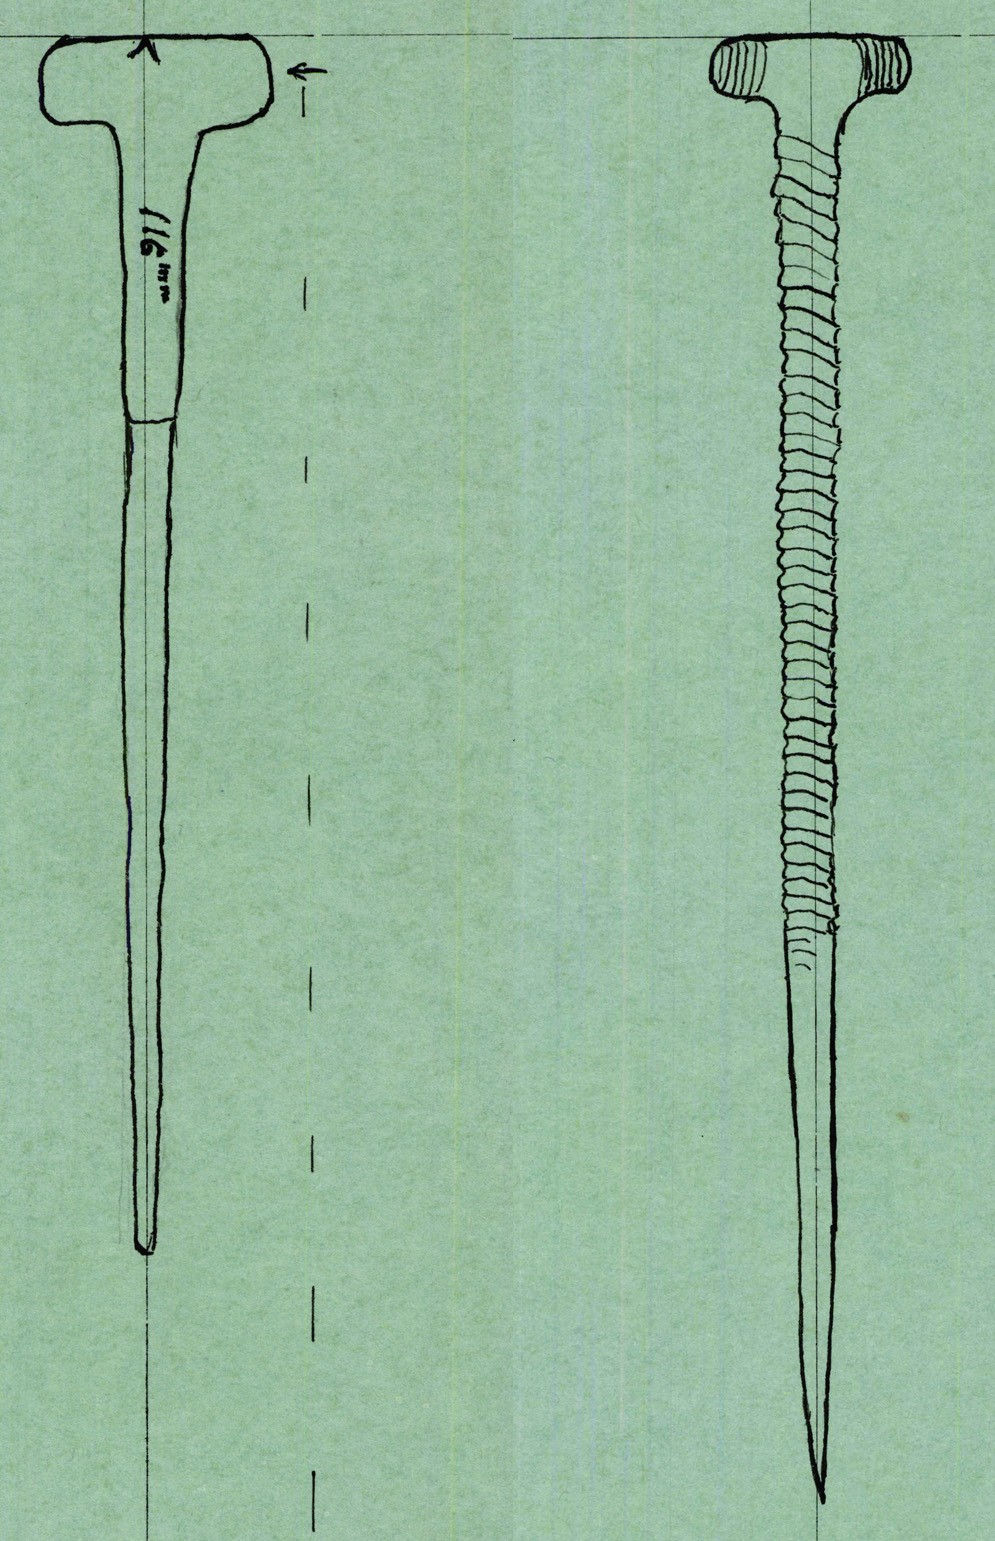 MBA pins from West Overton G1 barrow (left) and Silk Hill barrow (right). © Trustees of the British Museum